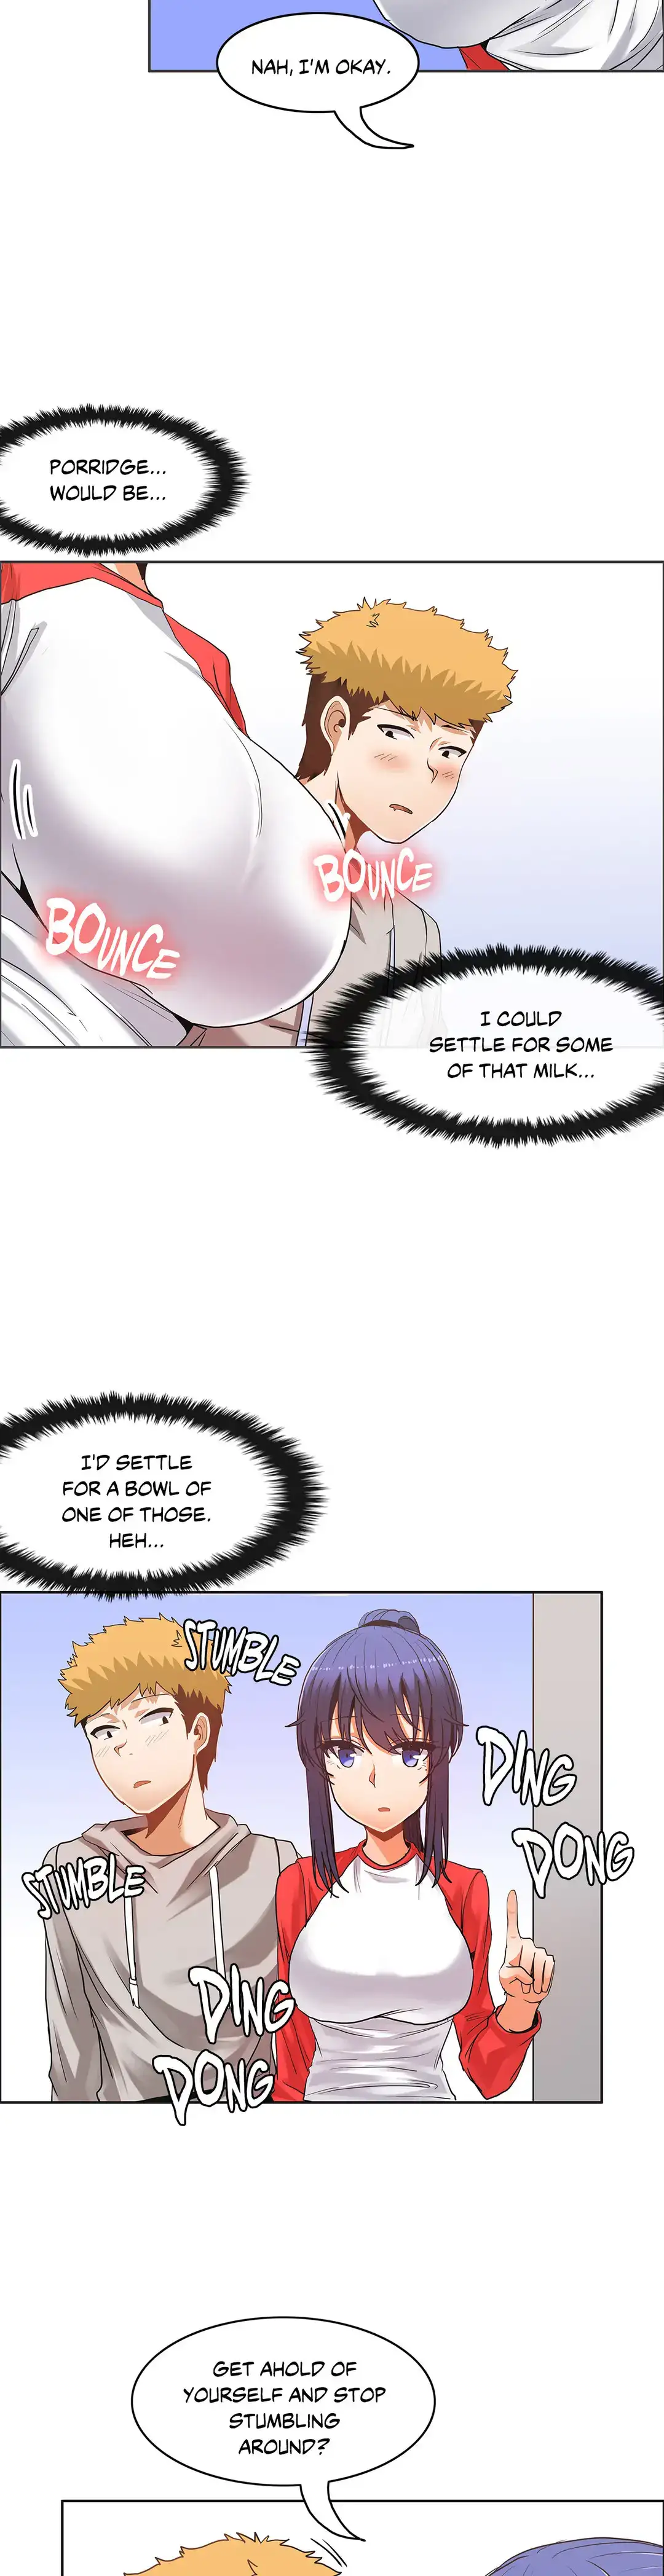 The Girl That Wet the Wall - Chapter 28 Page 27